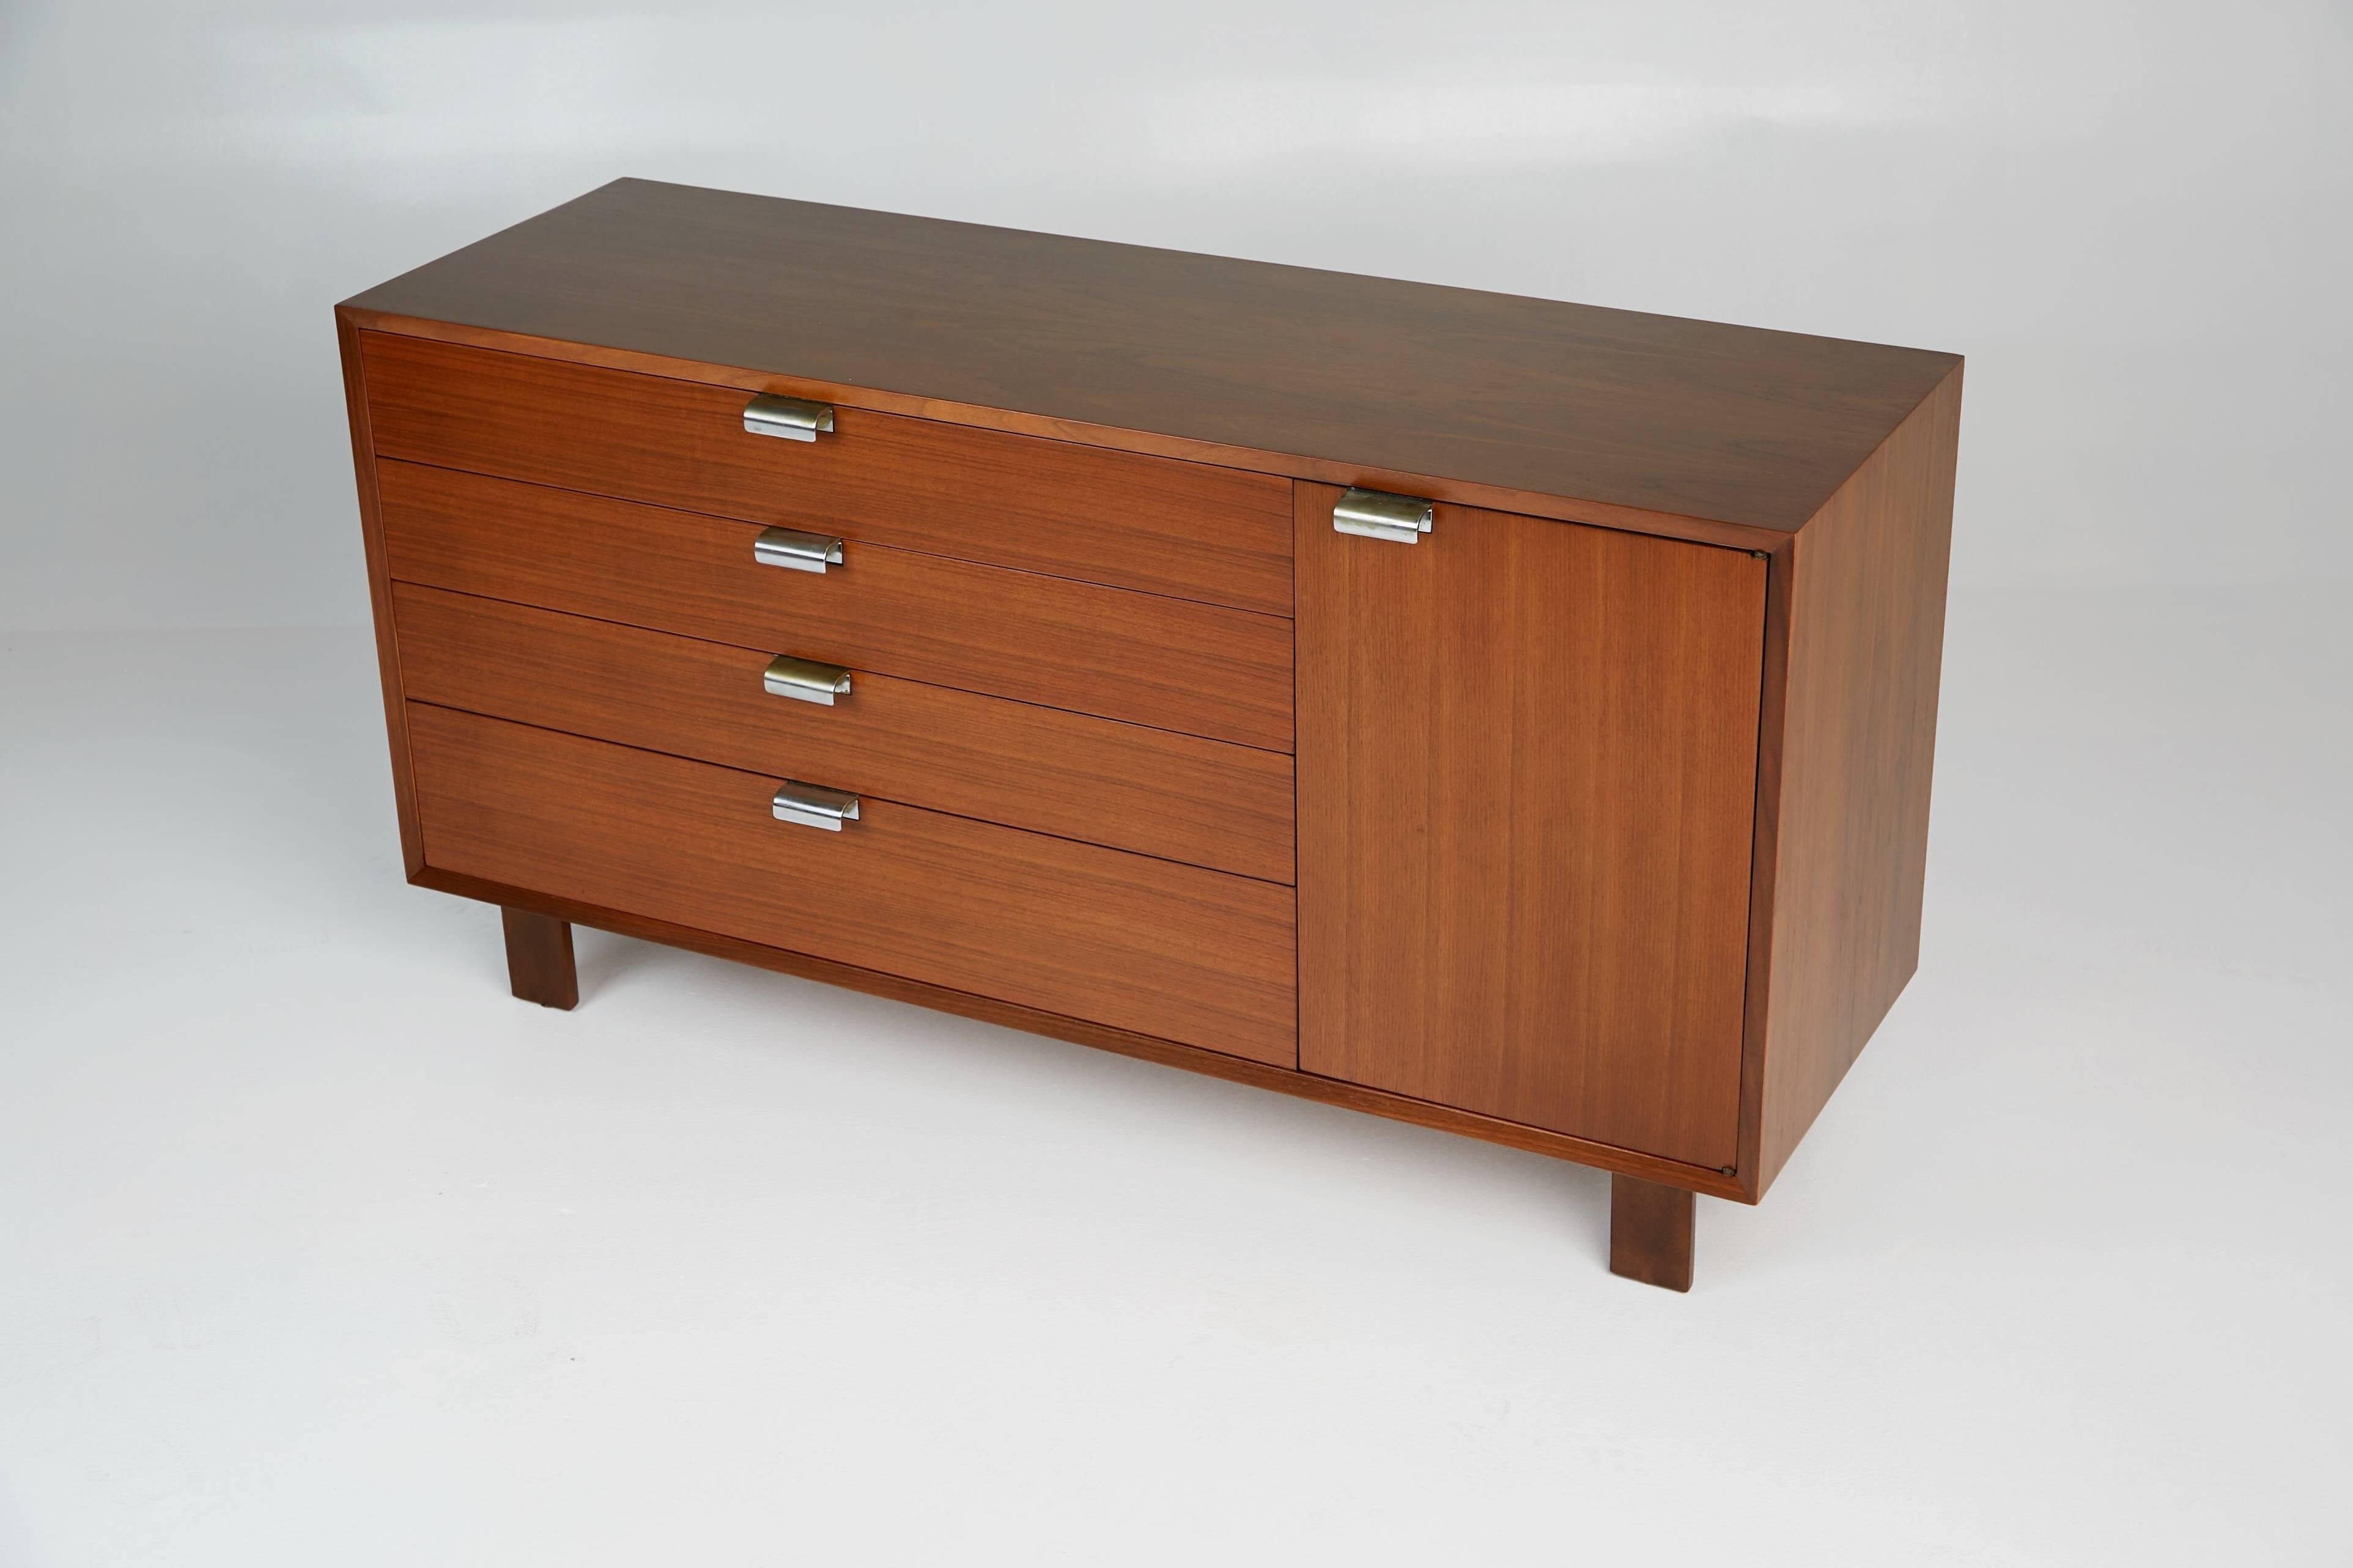 *NOTE* For all items from this dealer, please click VIEW ALL FROM SELLER below on this page.

Designed by George Nelson, this dresser or credenza was part of Herman Miller's collection of modular basic storage components. This cabinet has been newly